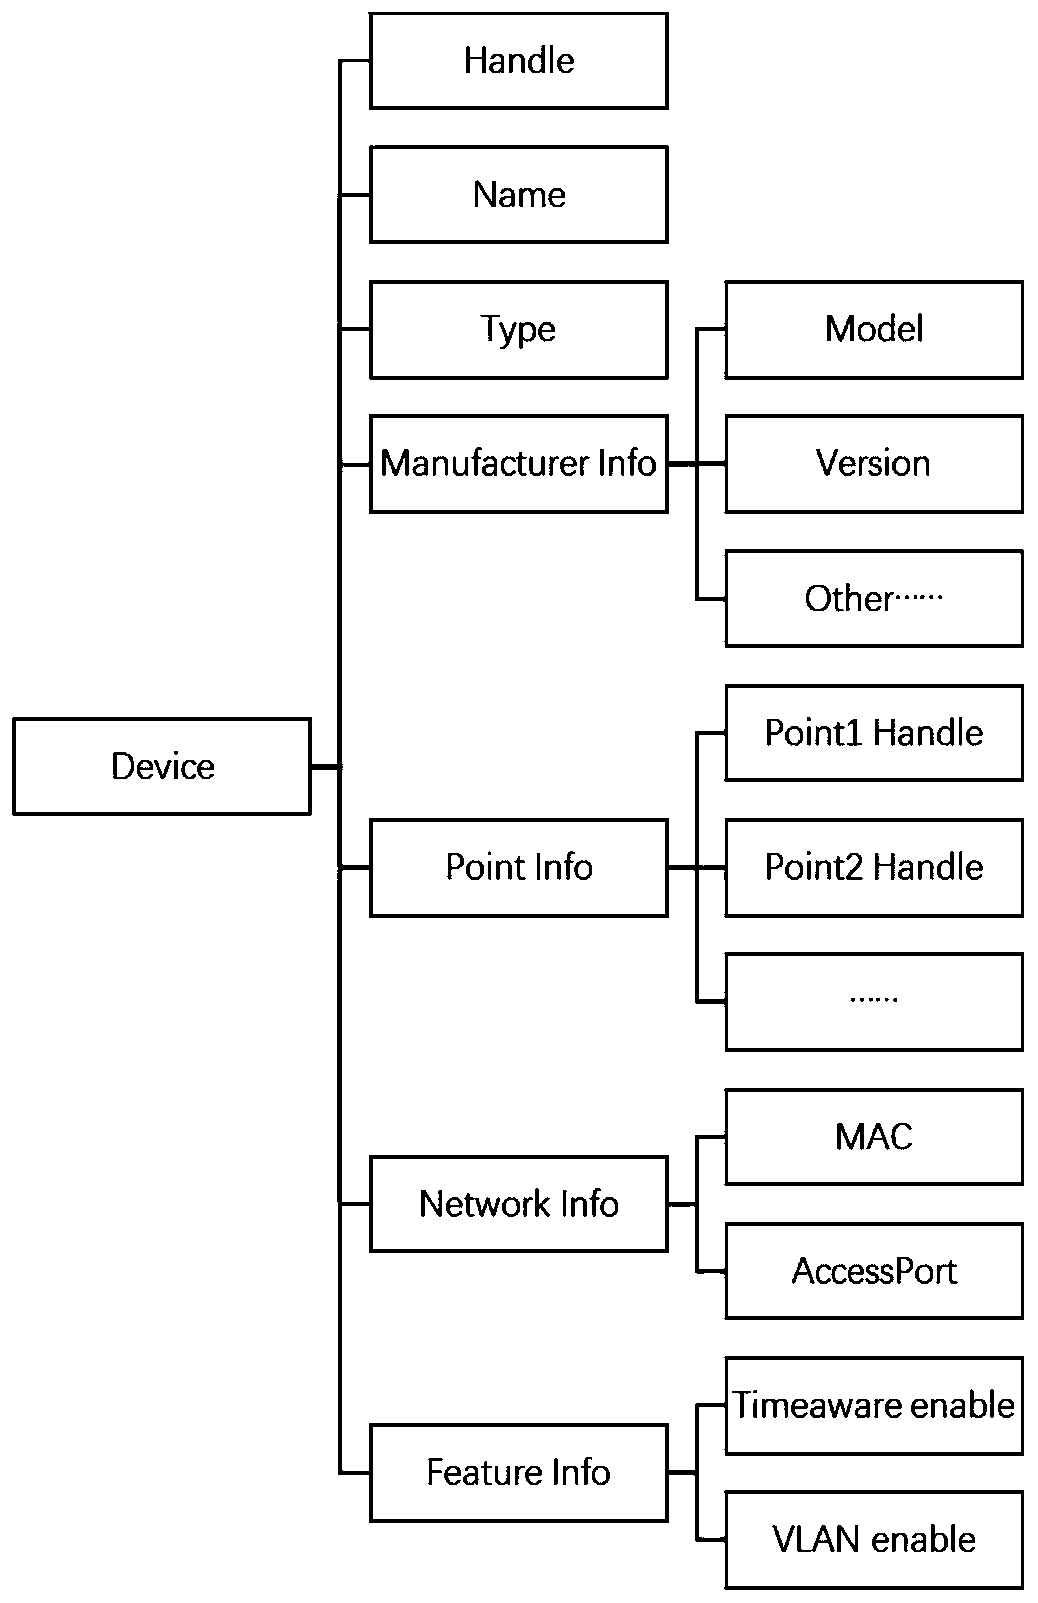 A semantic industrial network service interface system based on Handle identification